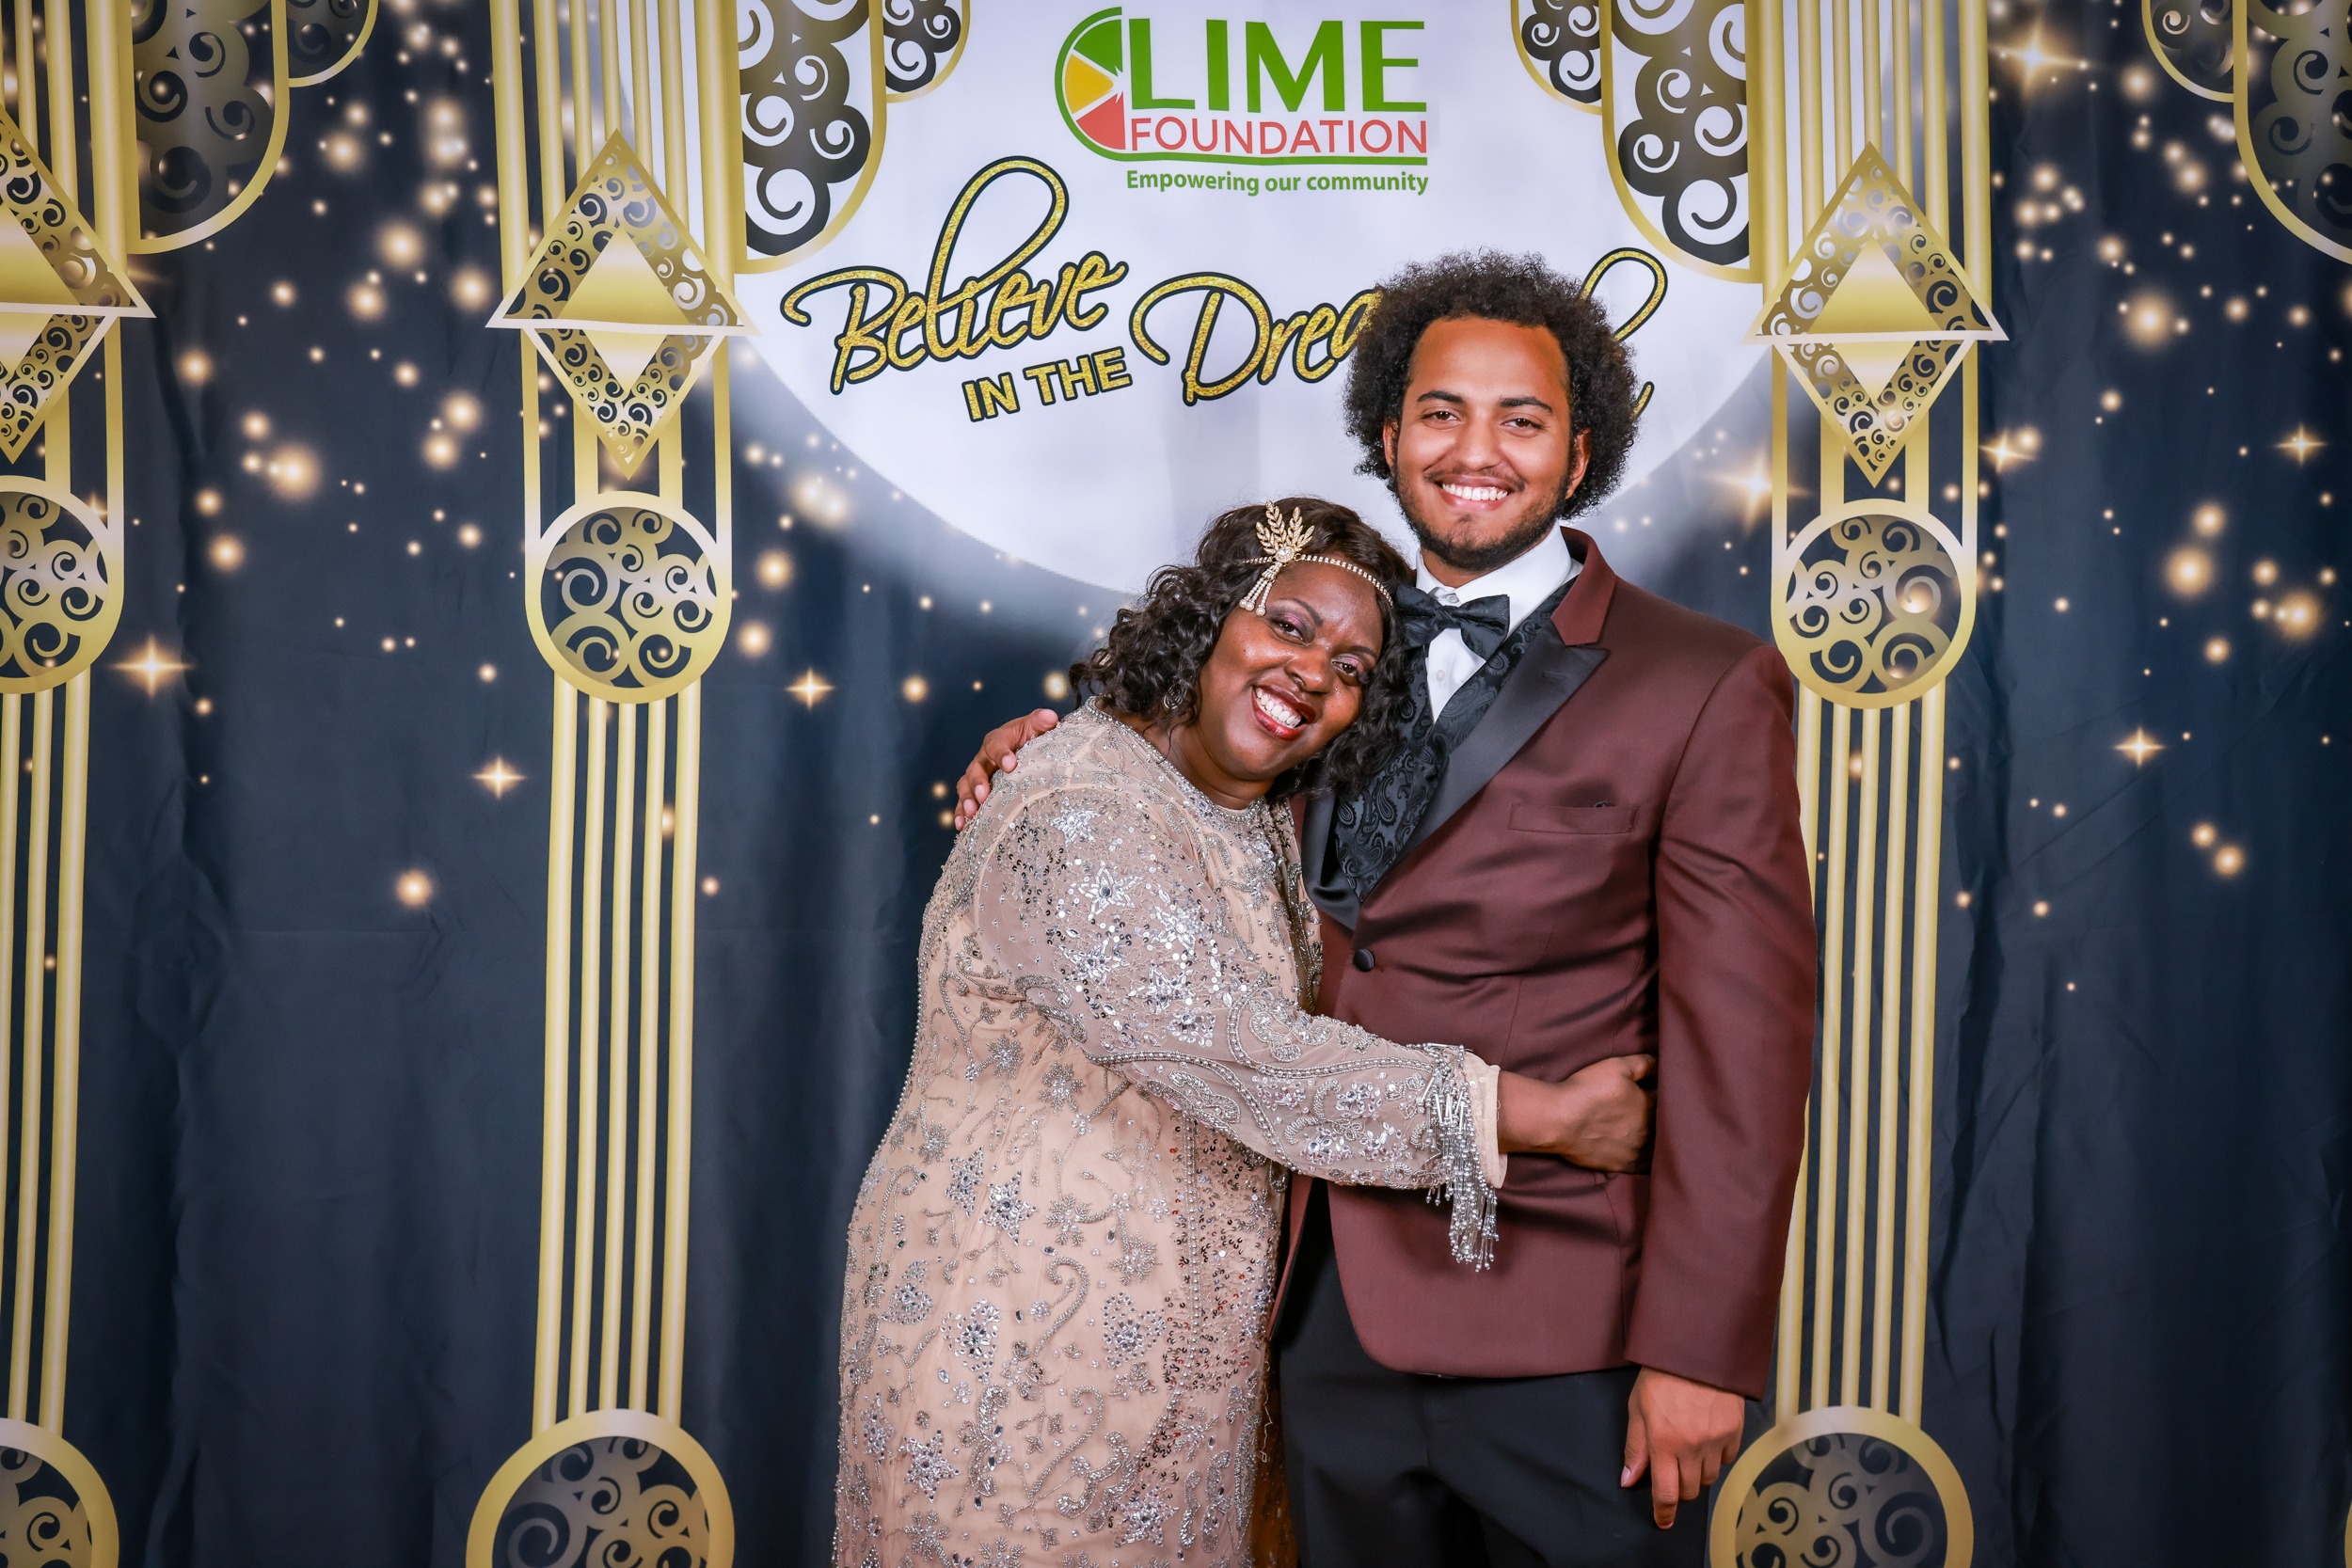 A man and woman posing for a photo at an event hosted by The LIME Foundation of Santa Rosa.